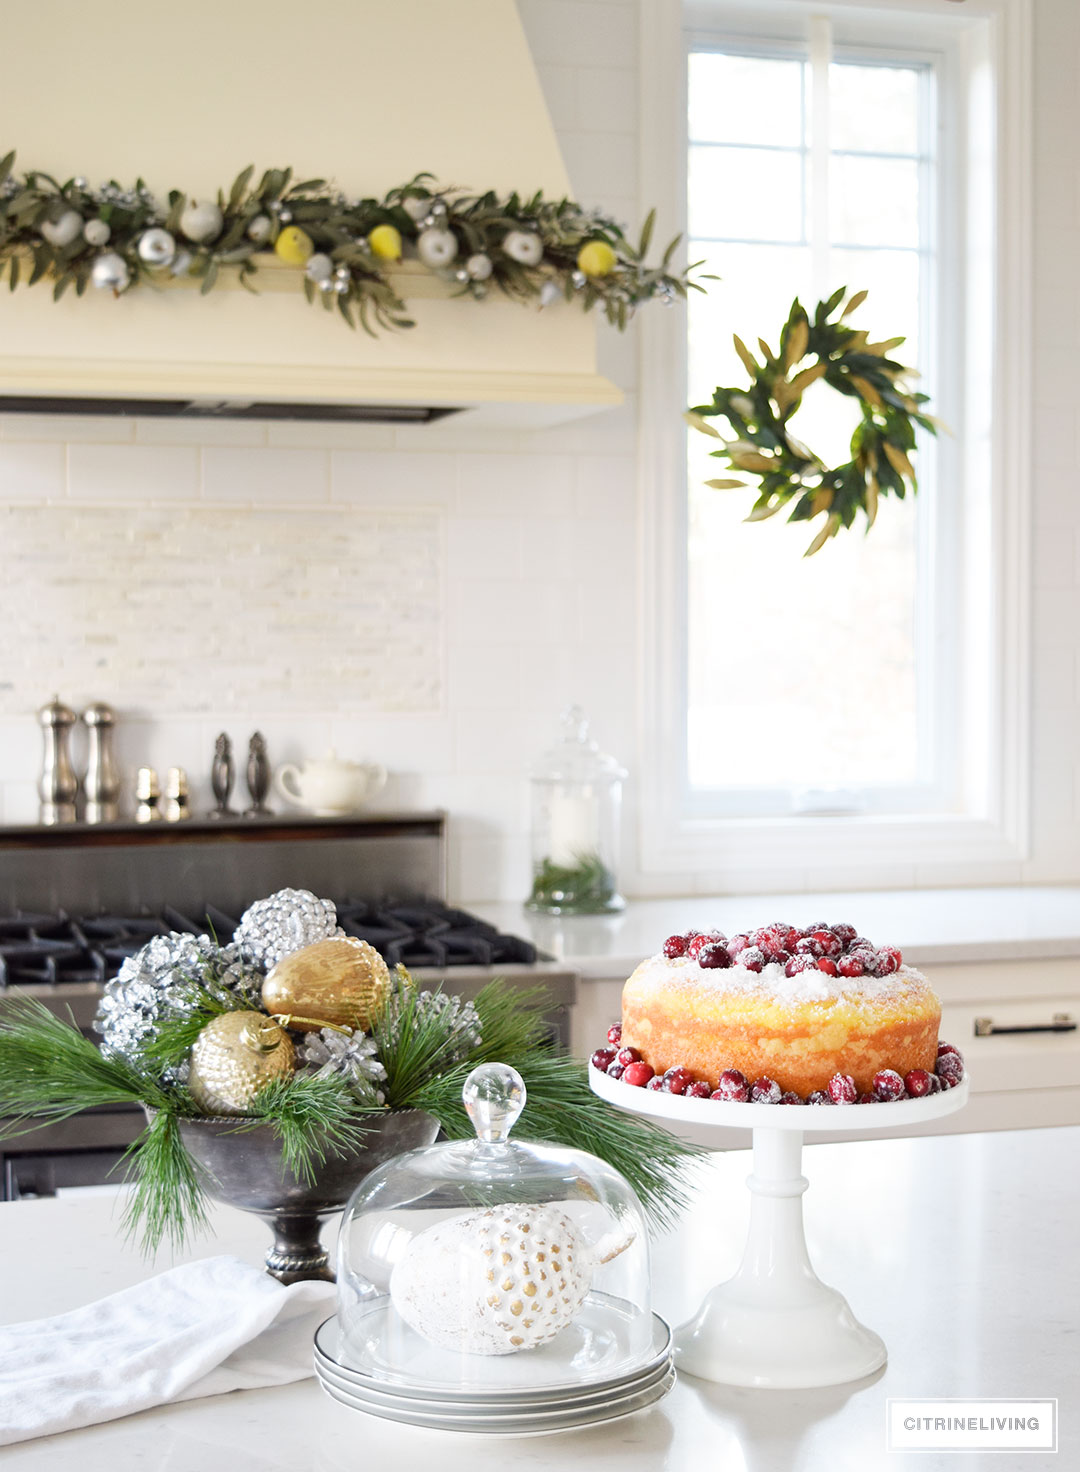 Christmas Home Tour - Elegant kitchen with mixed metallics and holiday greenery create a sophisticated Holiday theme